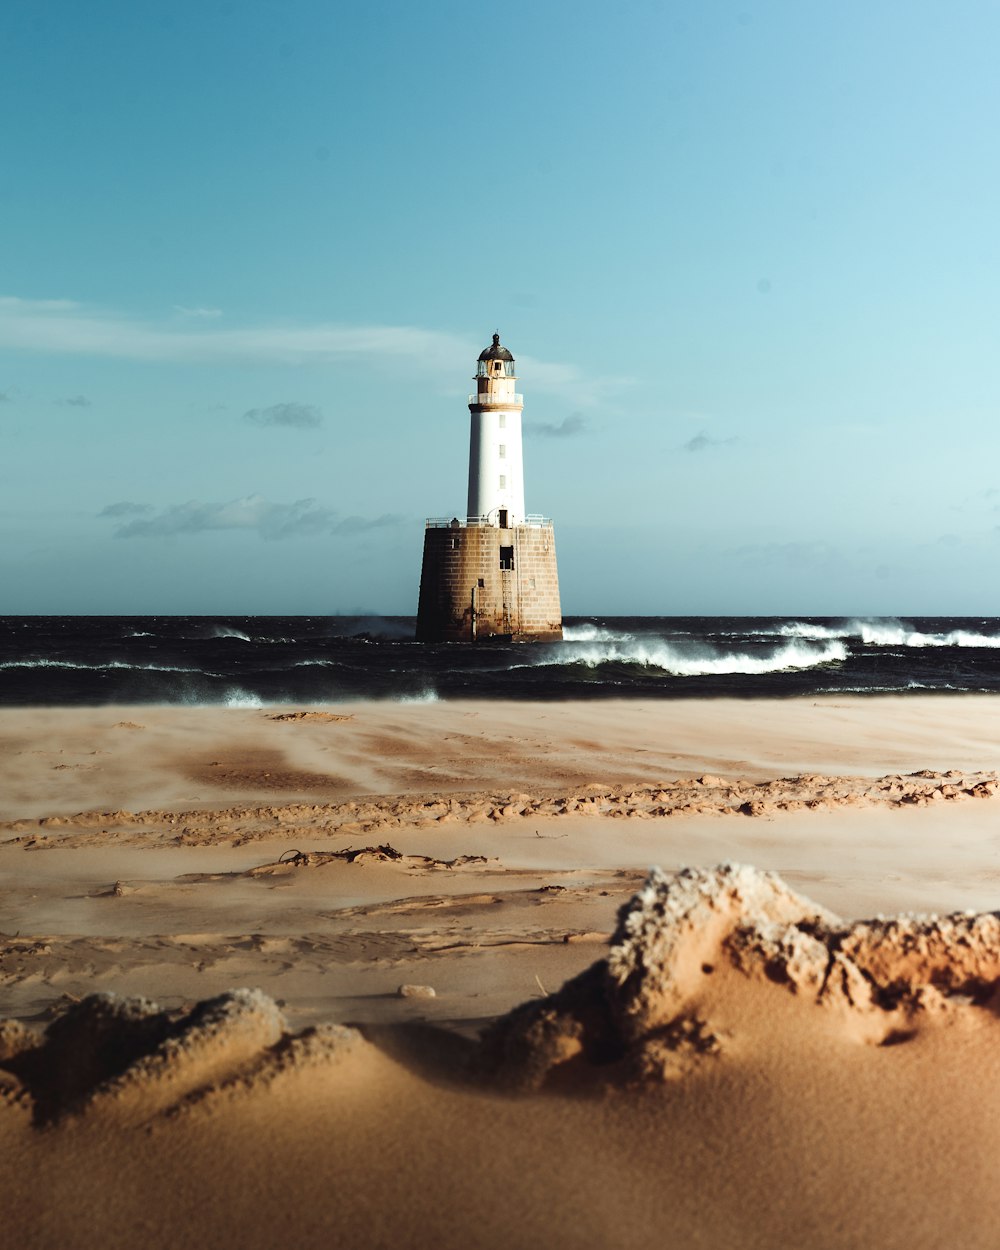 white and black lighthouse on brown sand near body of water during daytime